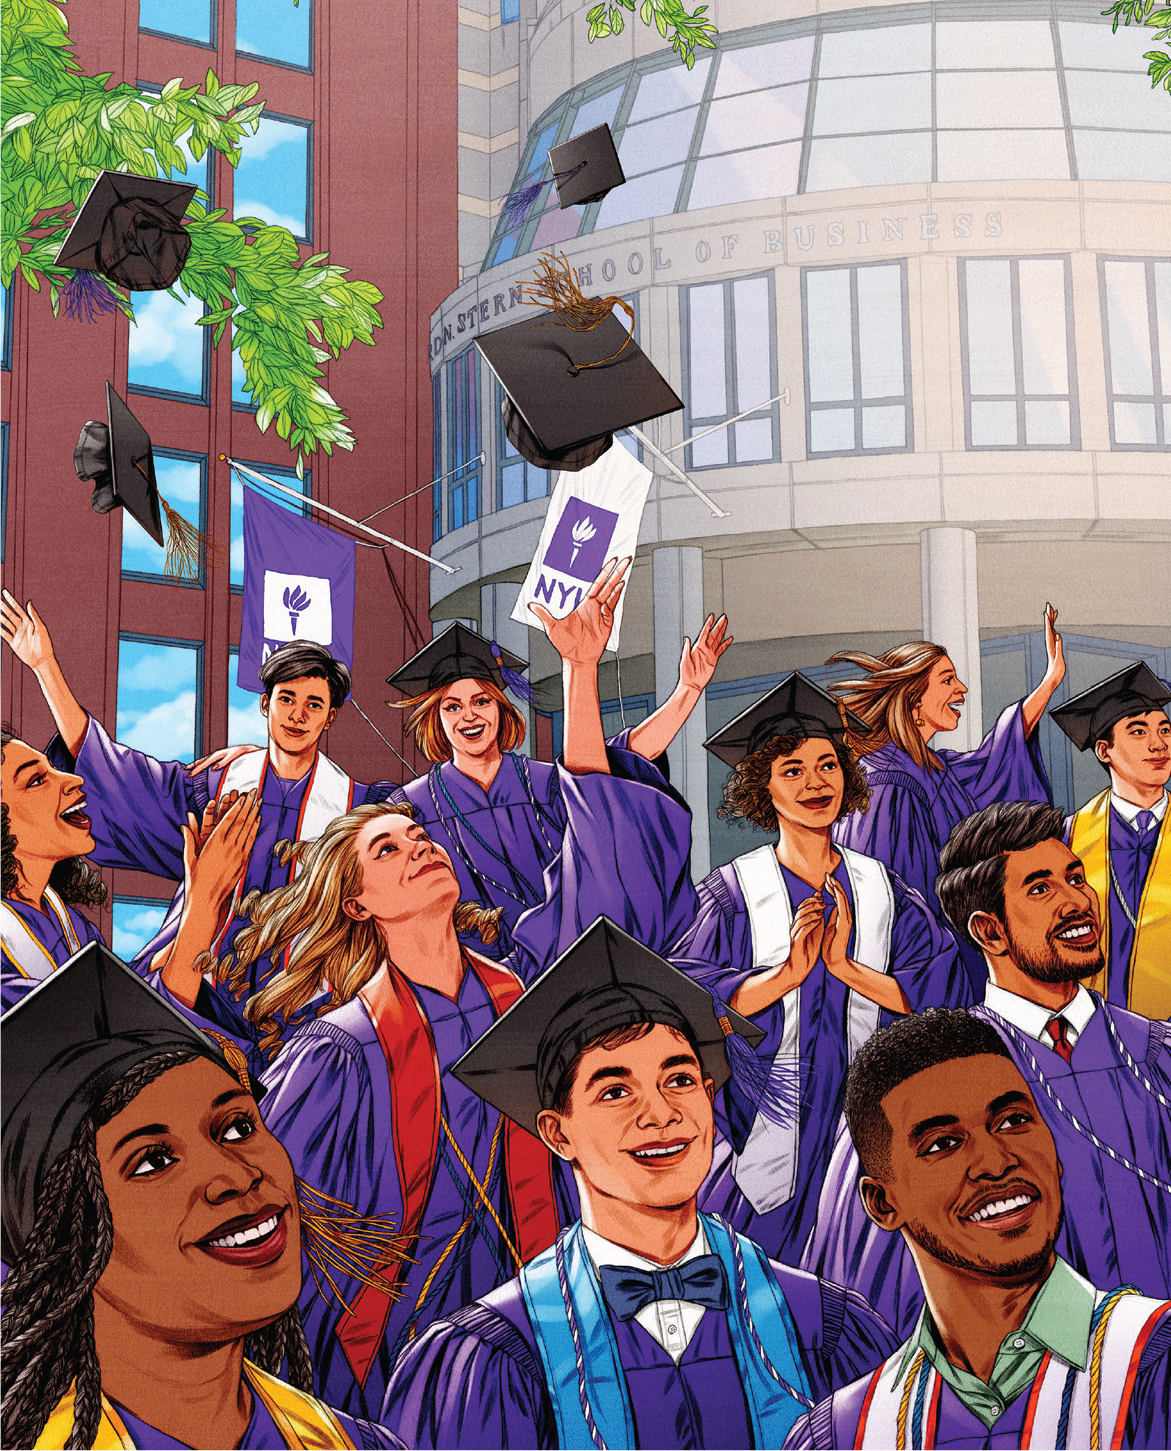 Stern Business cover art shows a group of students in graduation gowns